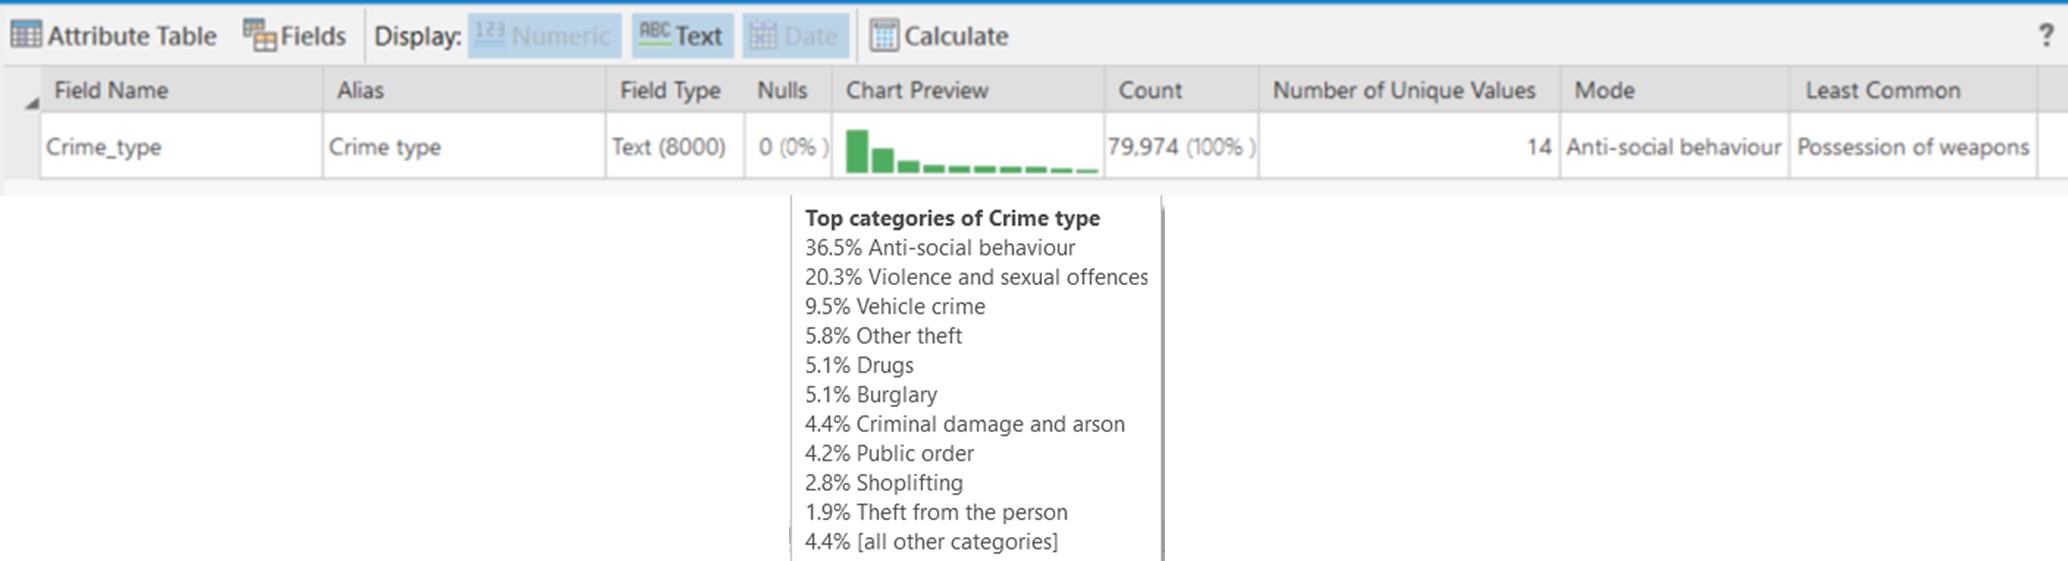 A screenshot of the data engineering tab within ArcGIS Pro, showing how crimes are divided by crime type.